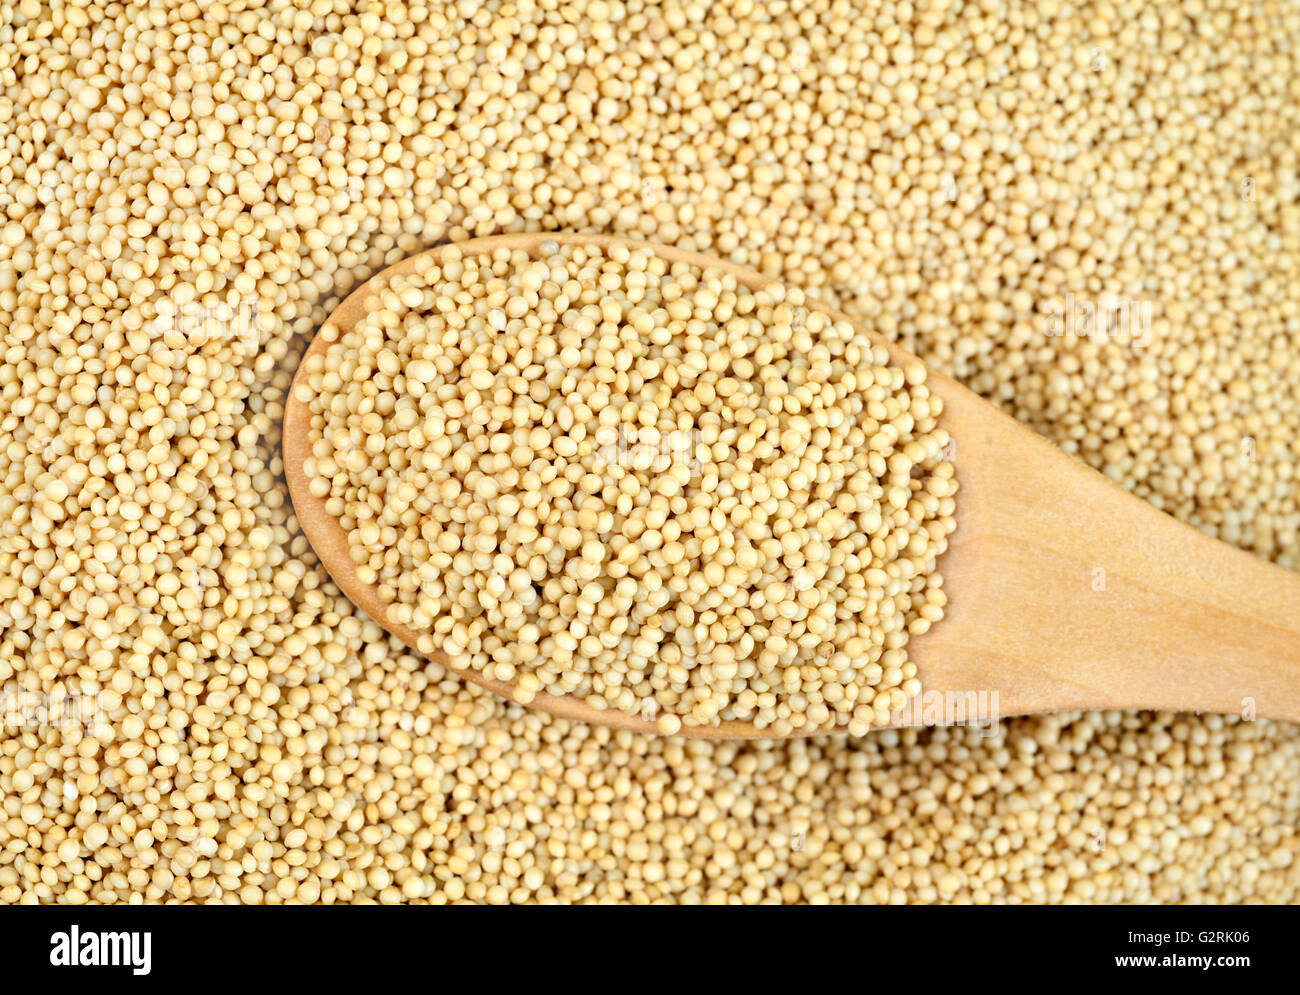 Amaranth seeds in a wooden spoon Stock Photo